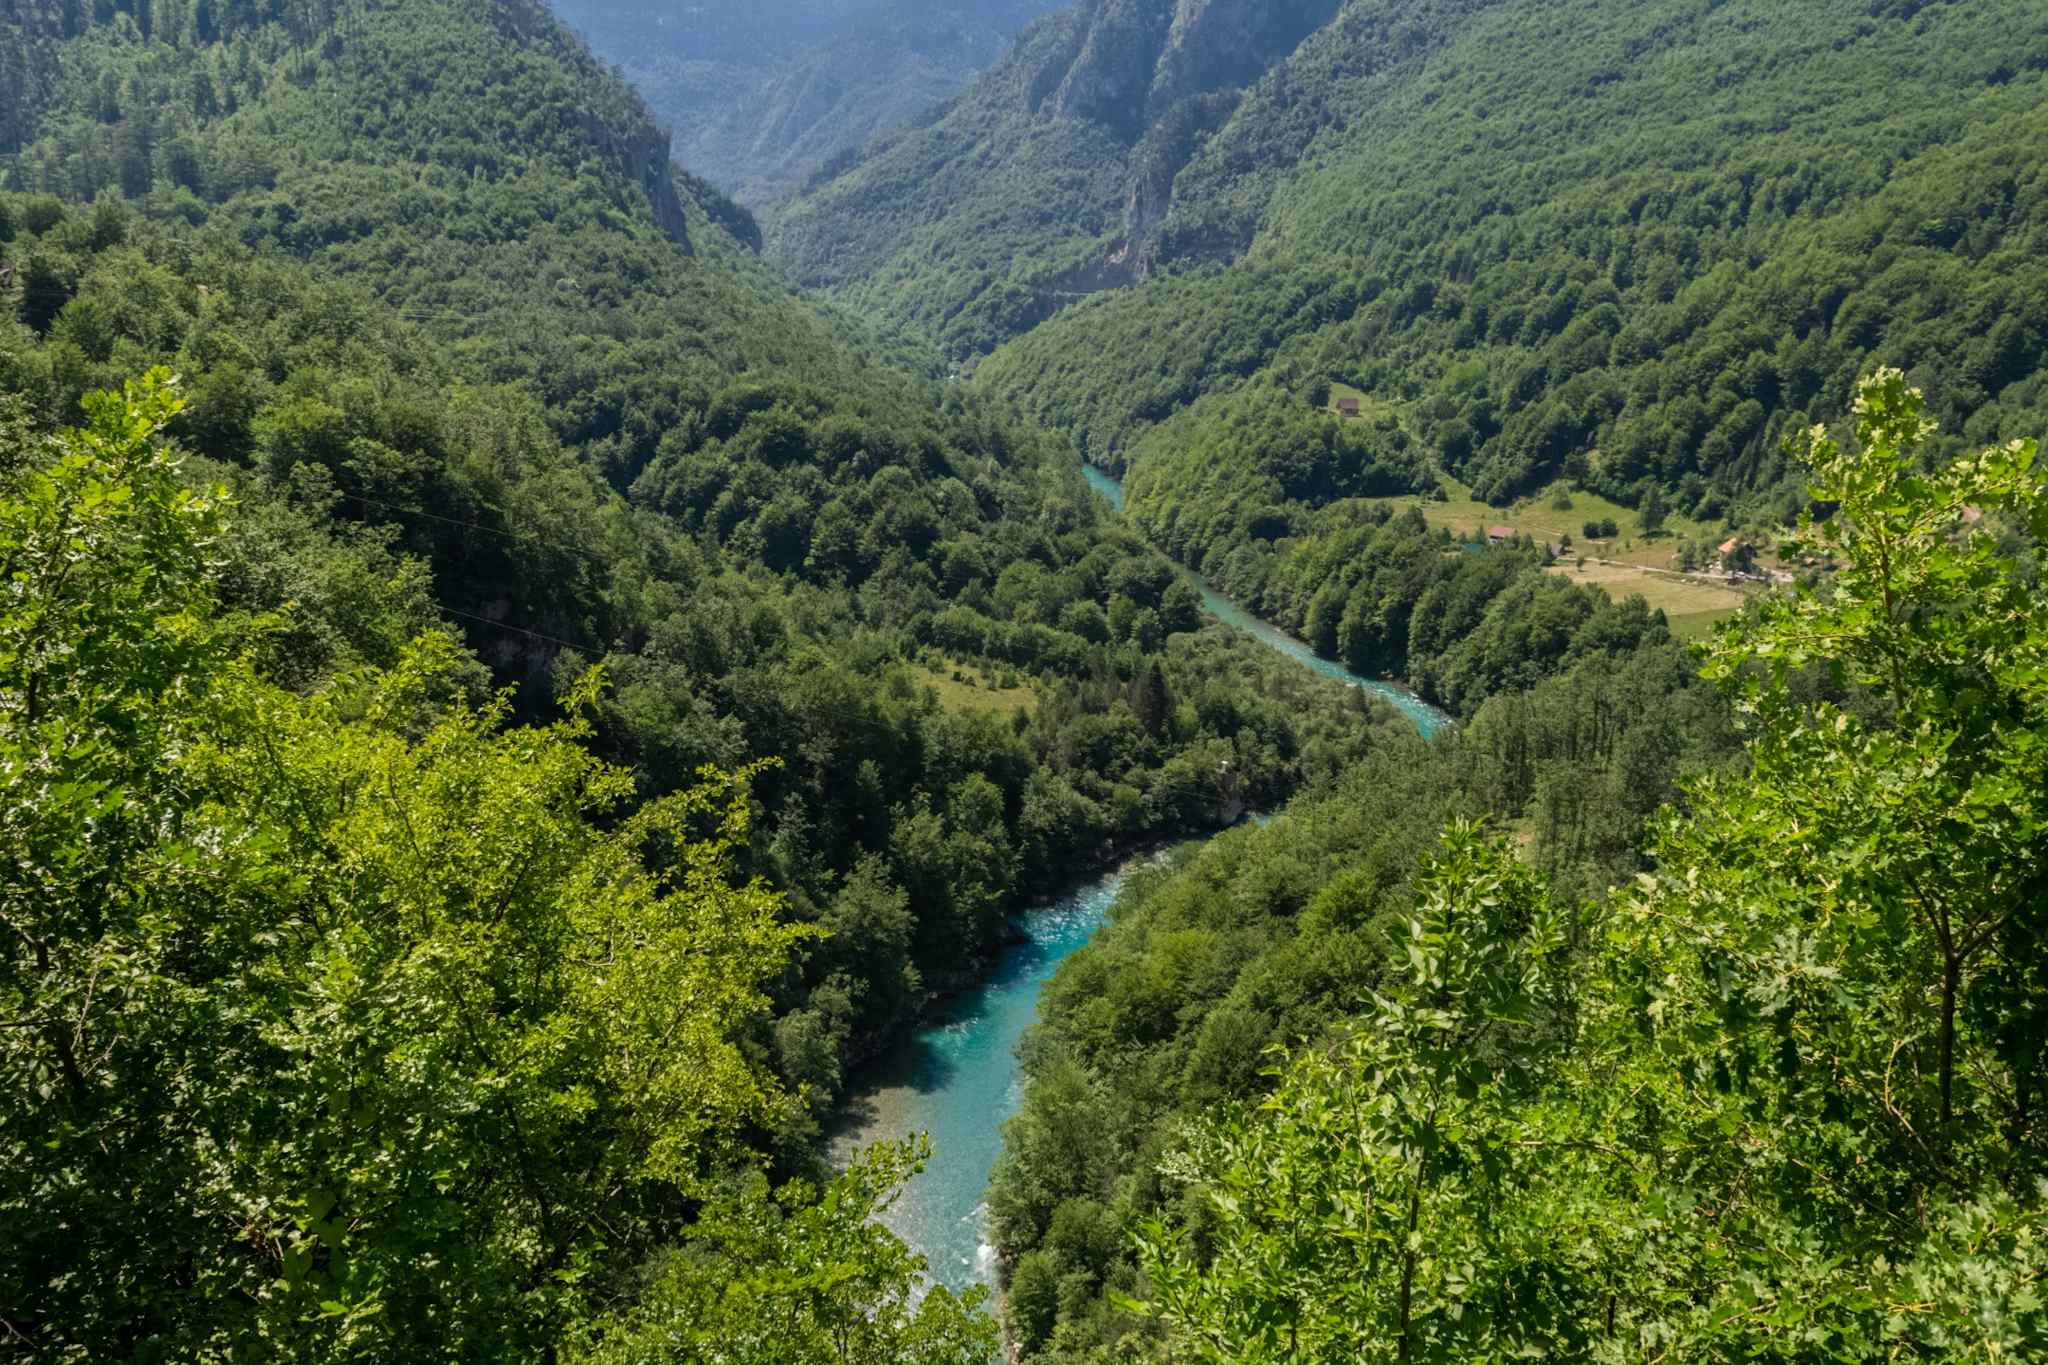 https://www.canva.com/photos/MAEpX7tcCnc-tara-river-canyon-or-tara-river-gorge-located-between-high-mountains-canyon-is-the-largest-and-deepest-canyon-in-europe-/